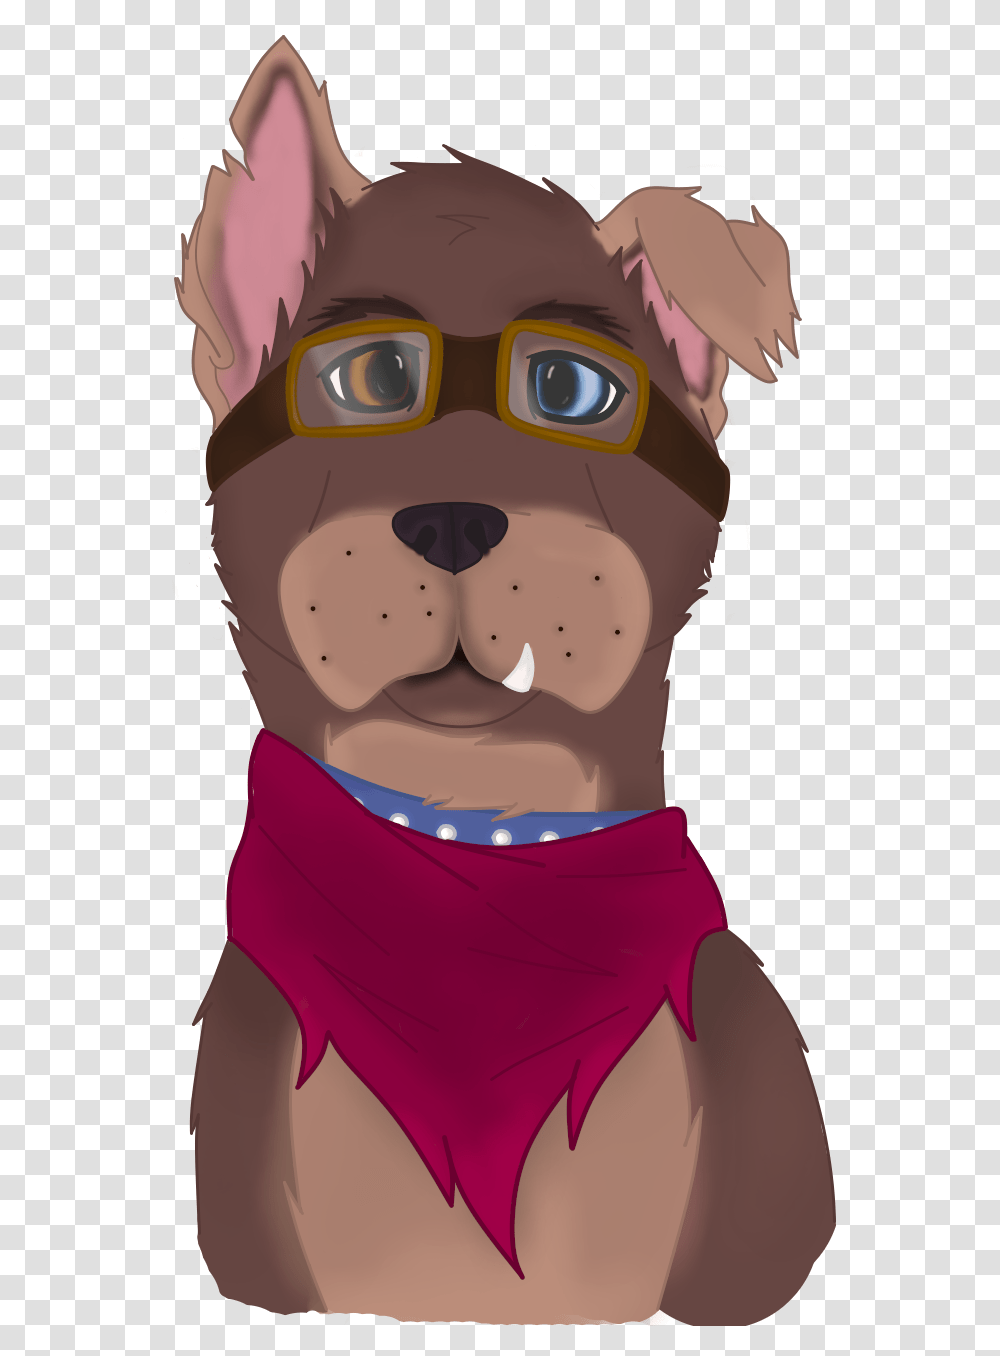 This Is Sparkys Design In The Au South Park Sparky, Apparel, Sunglasses, Accessories Transparent Png